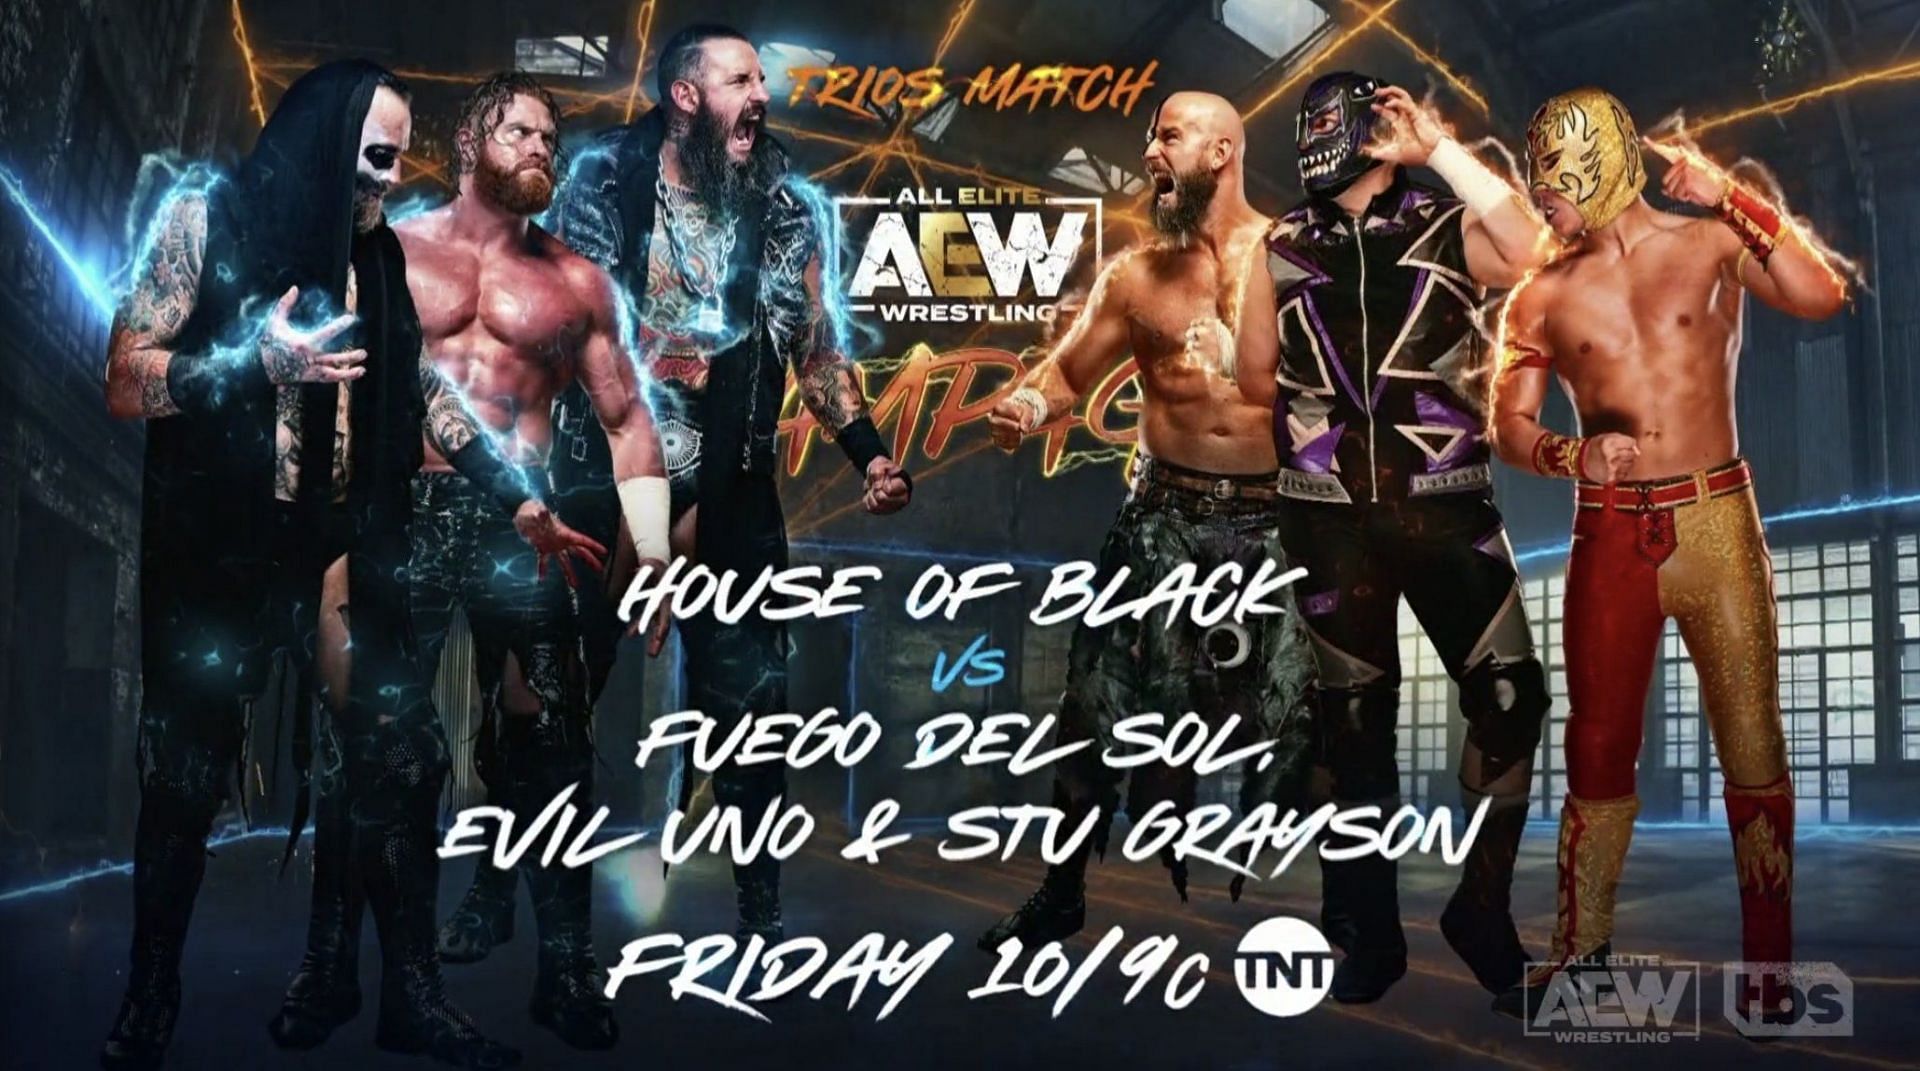 Fuego is set out to prove to himself and AEW that he can defeat the House of Black.